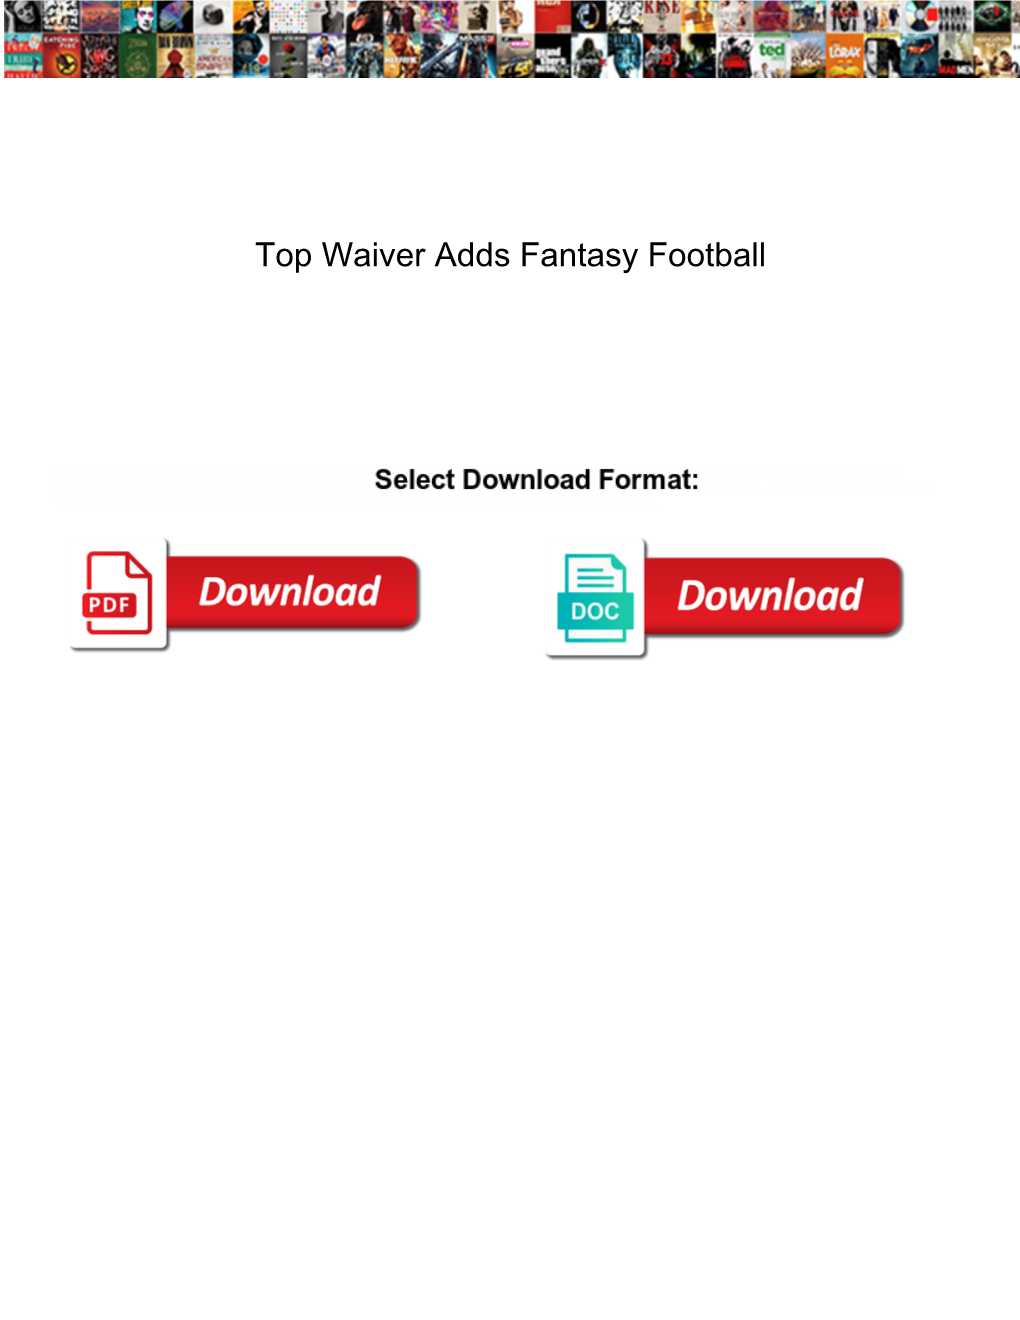 Top Waiver Adds Fantasy Football